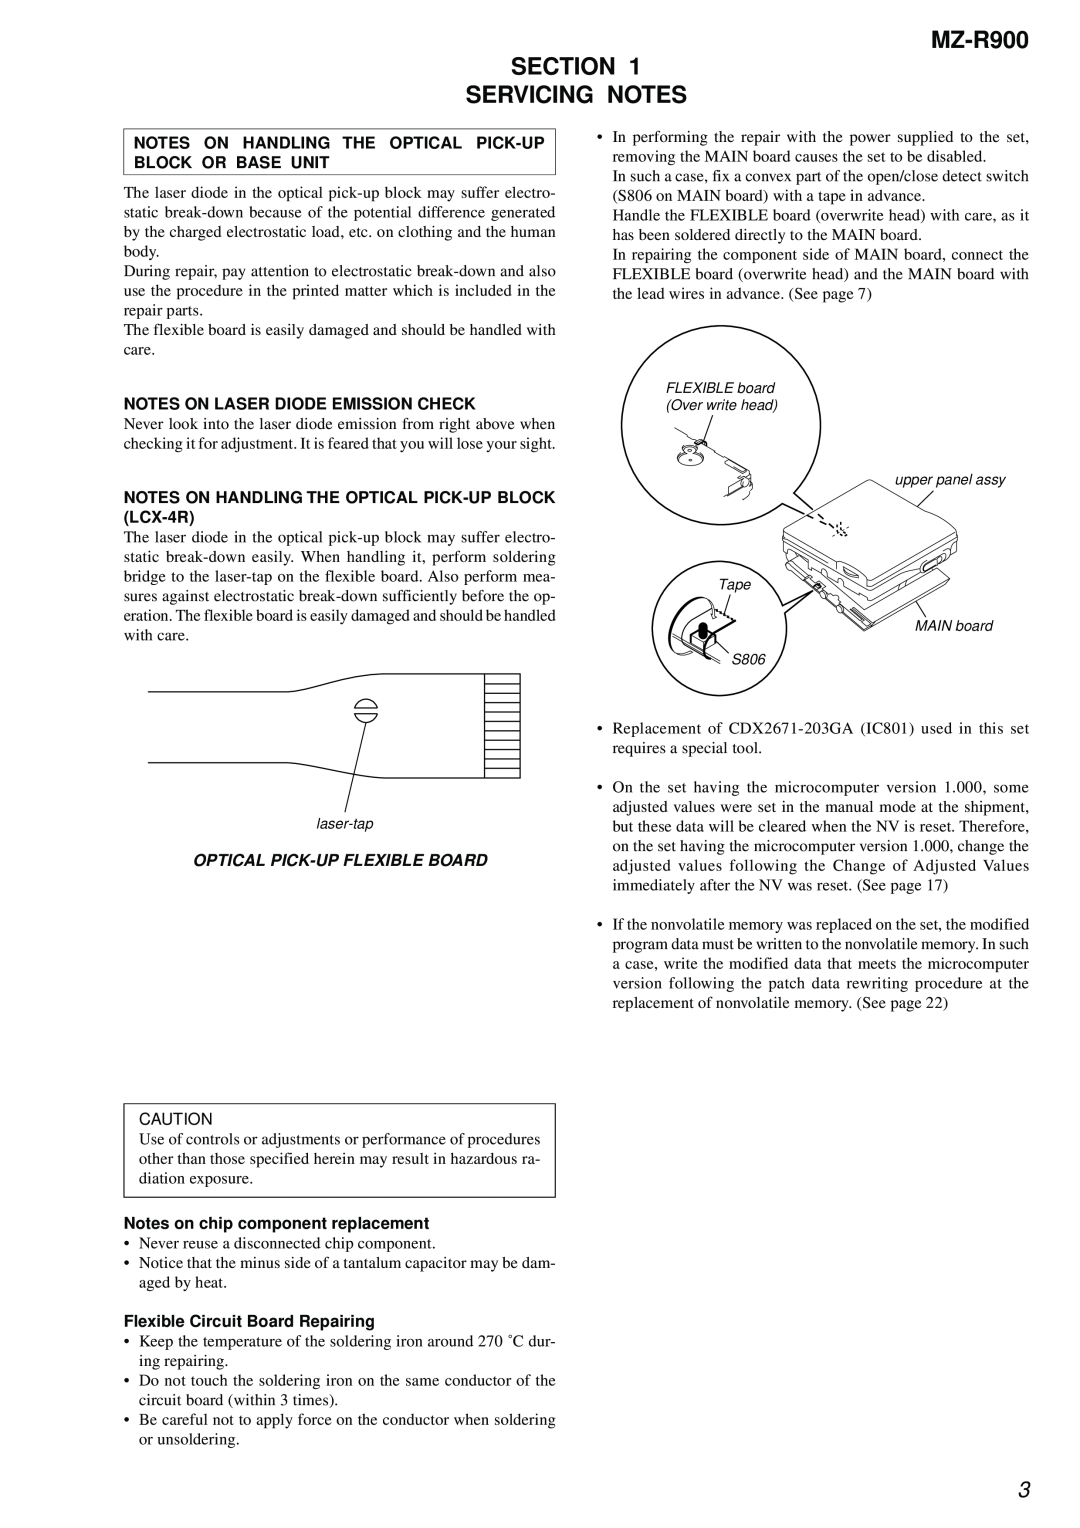 Sony service manual MZ-R900 SECTION SERVICING NOTES, Notes On Laser Diode Emission Check, Optical Pick-Upflexible Board 